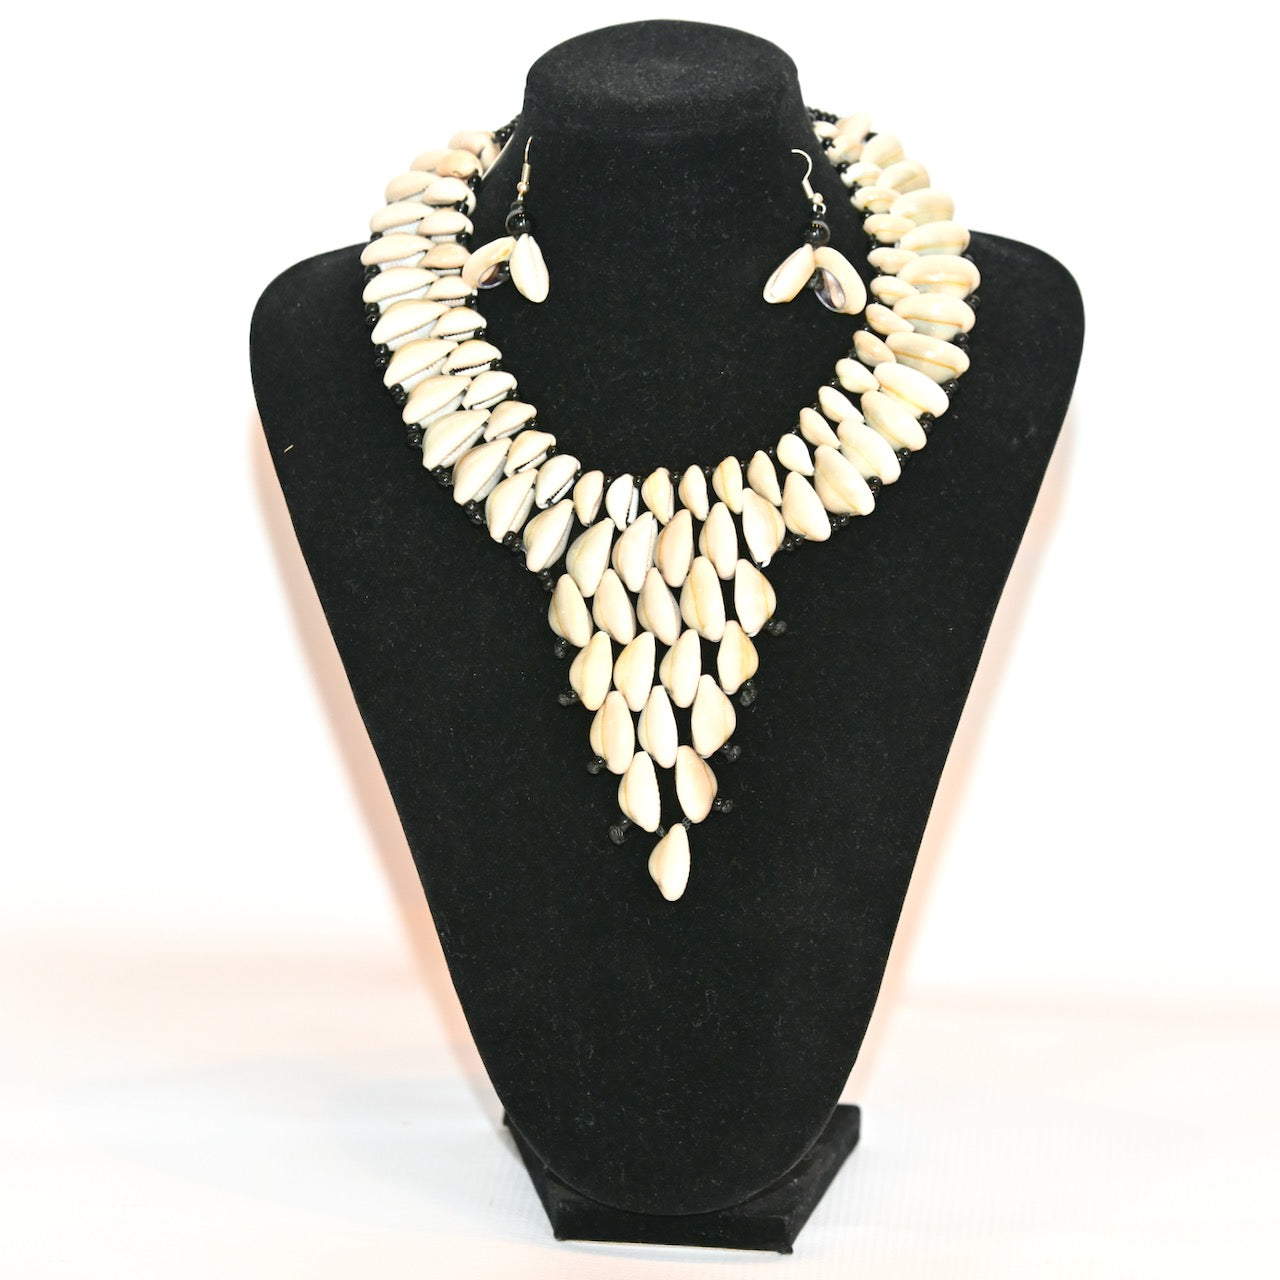 Petaw/Cowrie Shell Necklace